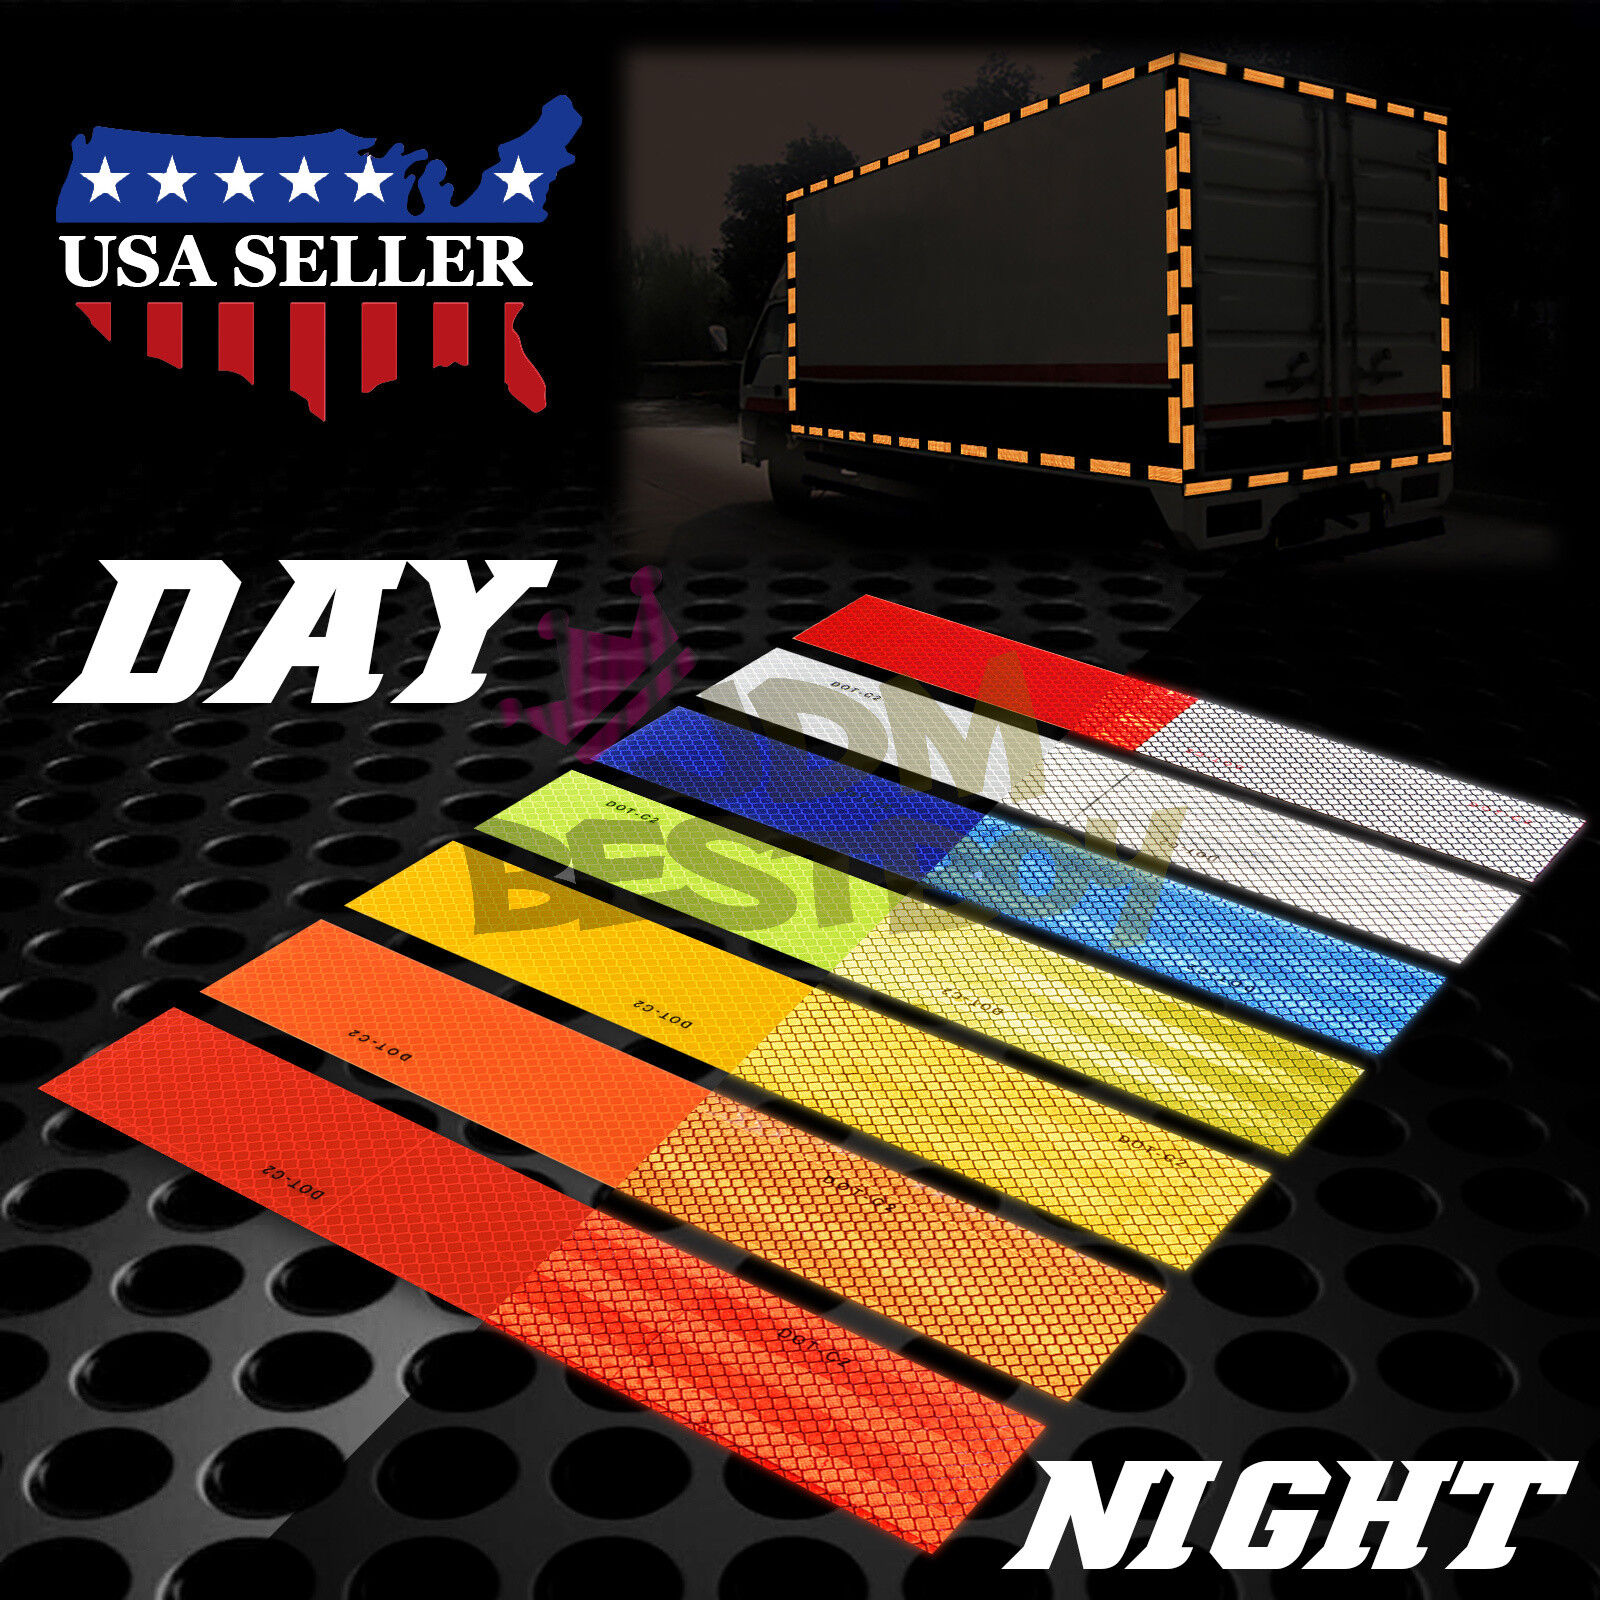 DOT-C2 Conspicuity Super sale period limited Reflective Tape Strip Detroit Mall Safety 1 Foot T Warning